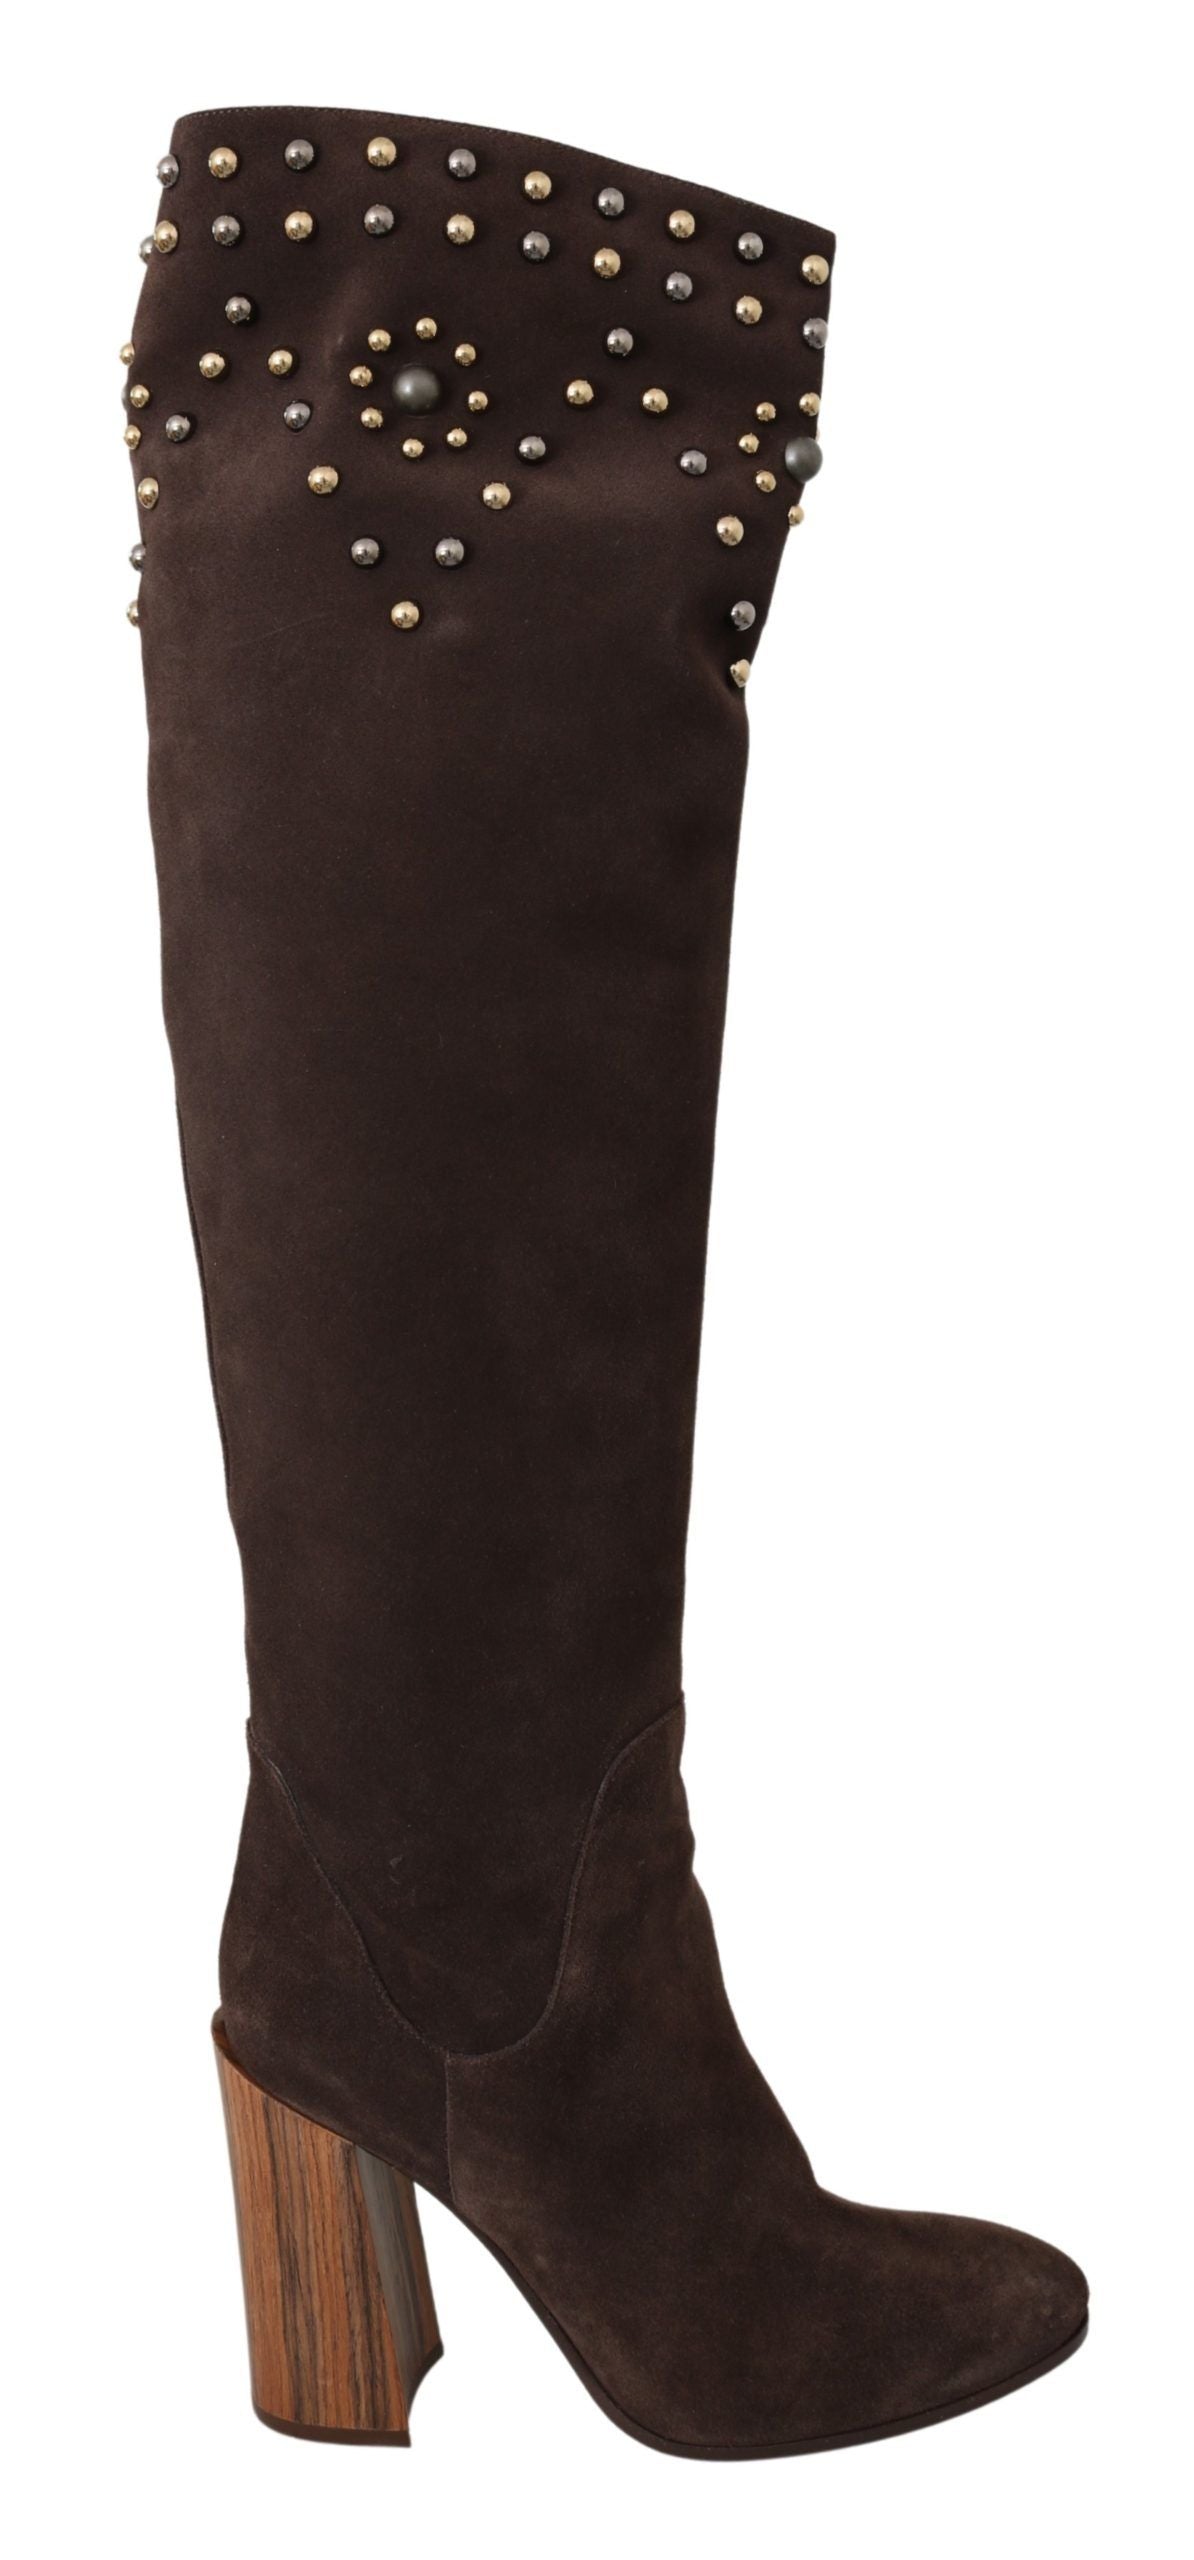 Brown Suede Studded Knee High Shoes Boots